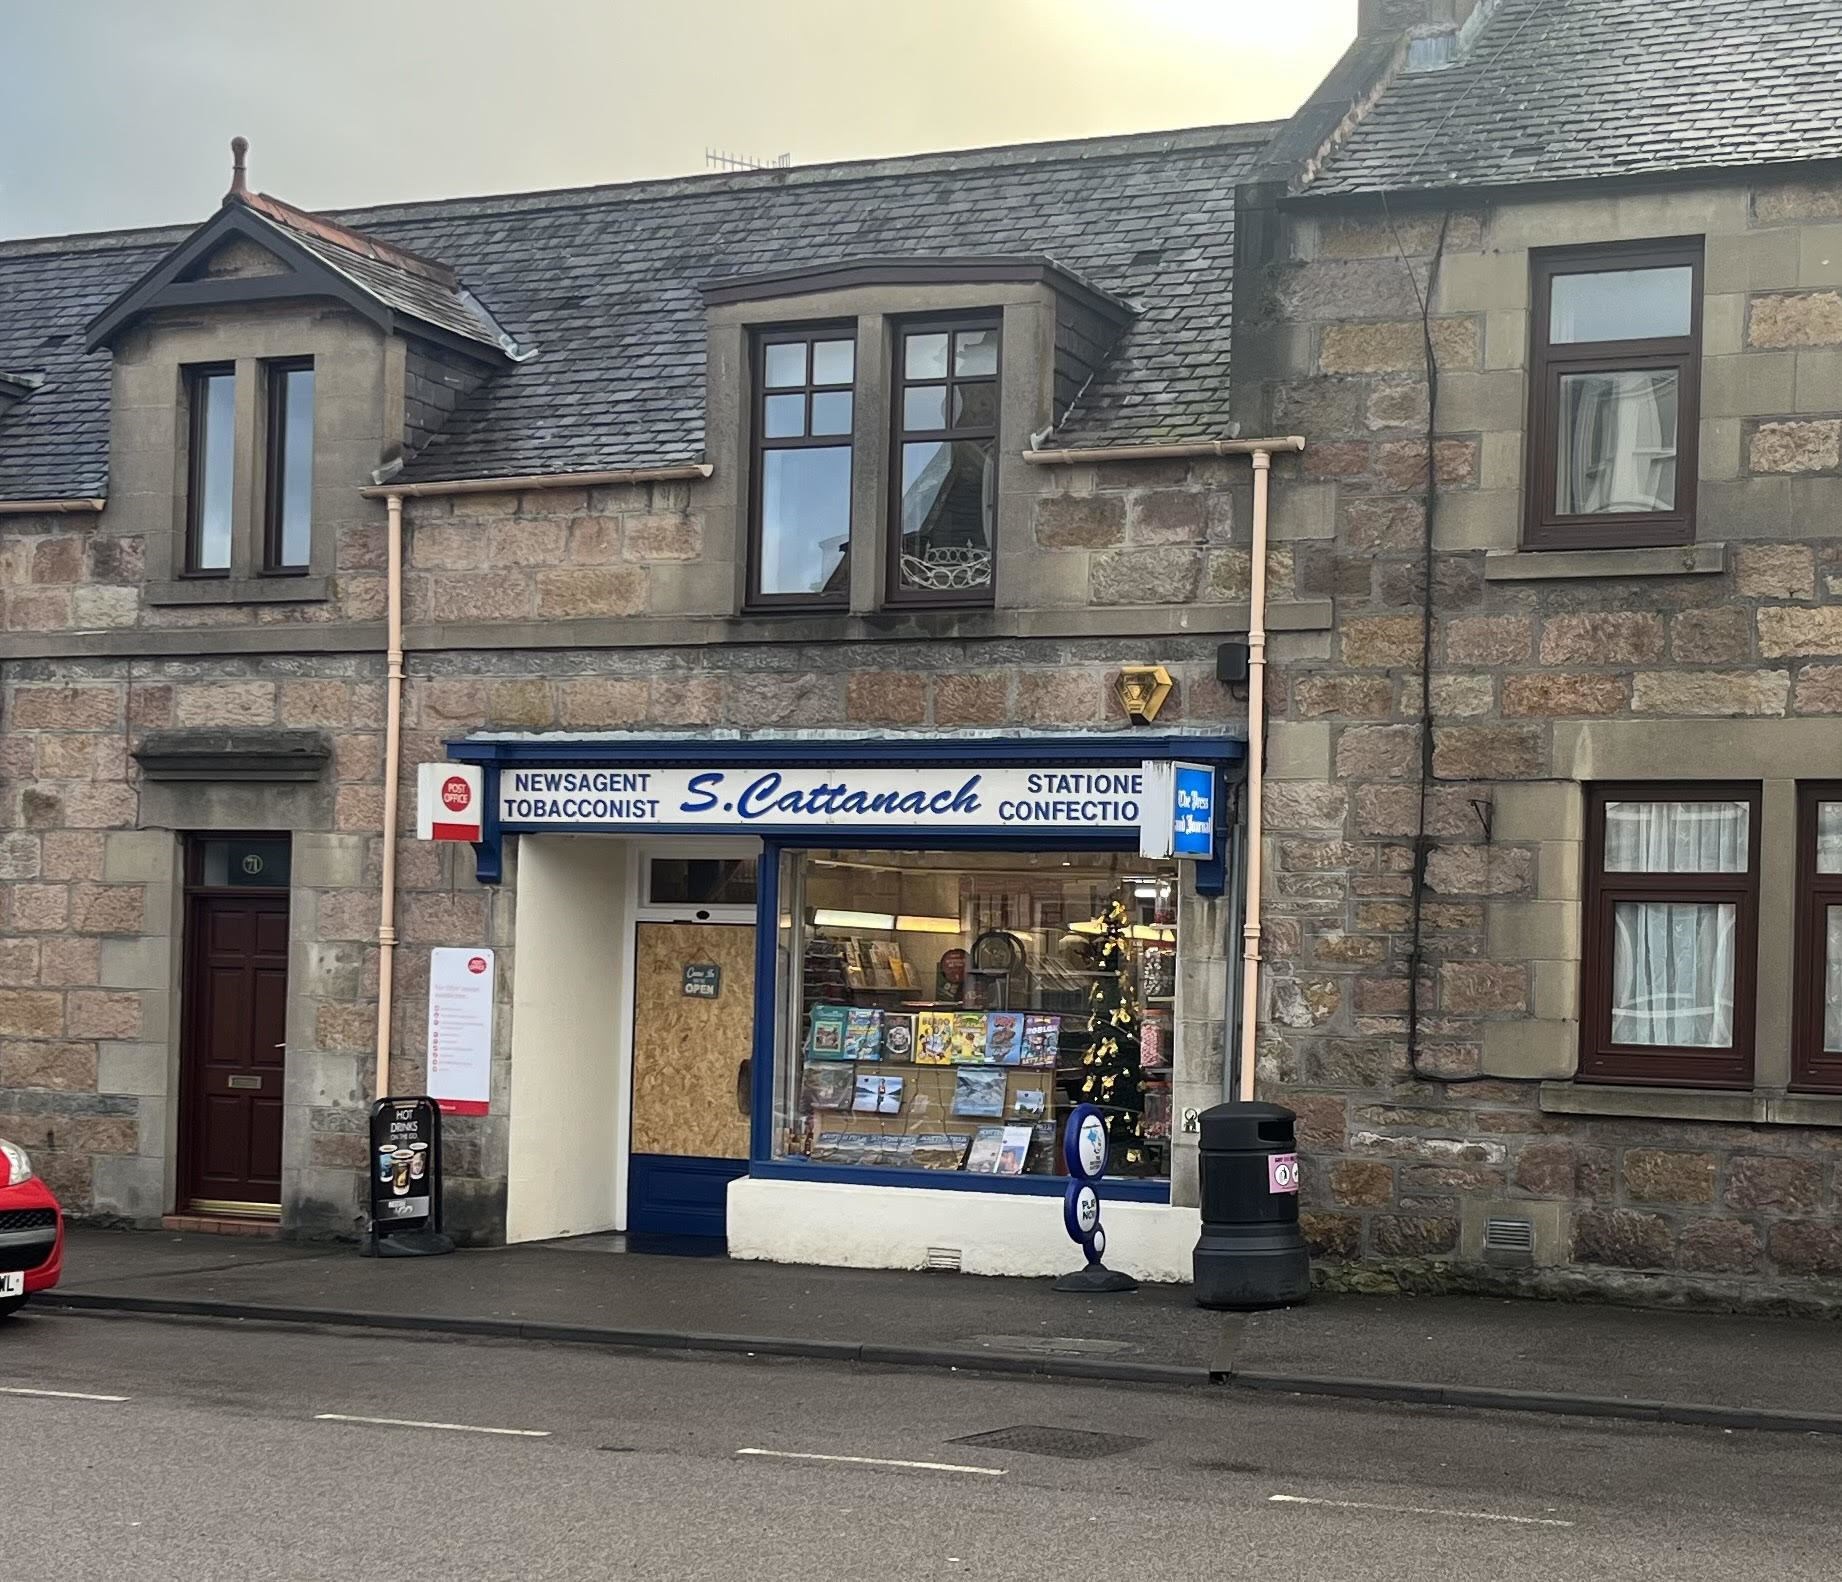 S Cattanach Newsagent in Aberlour was boarded up after the break-in last year.